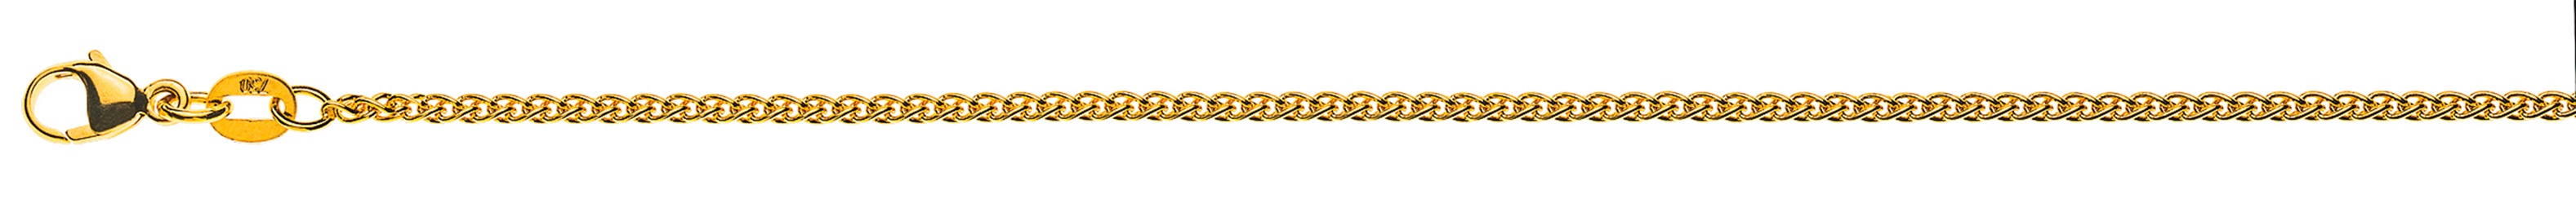 AURONOS Style Necklace yellow gold 9K cable chain 42cm 1.65mm